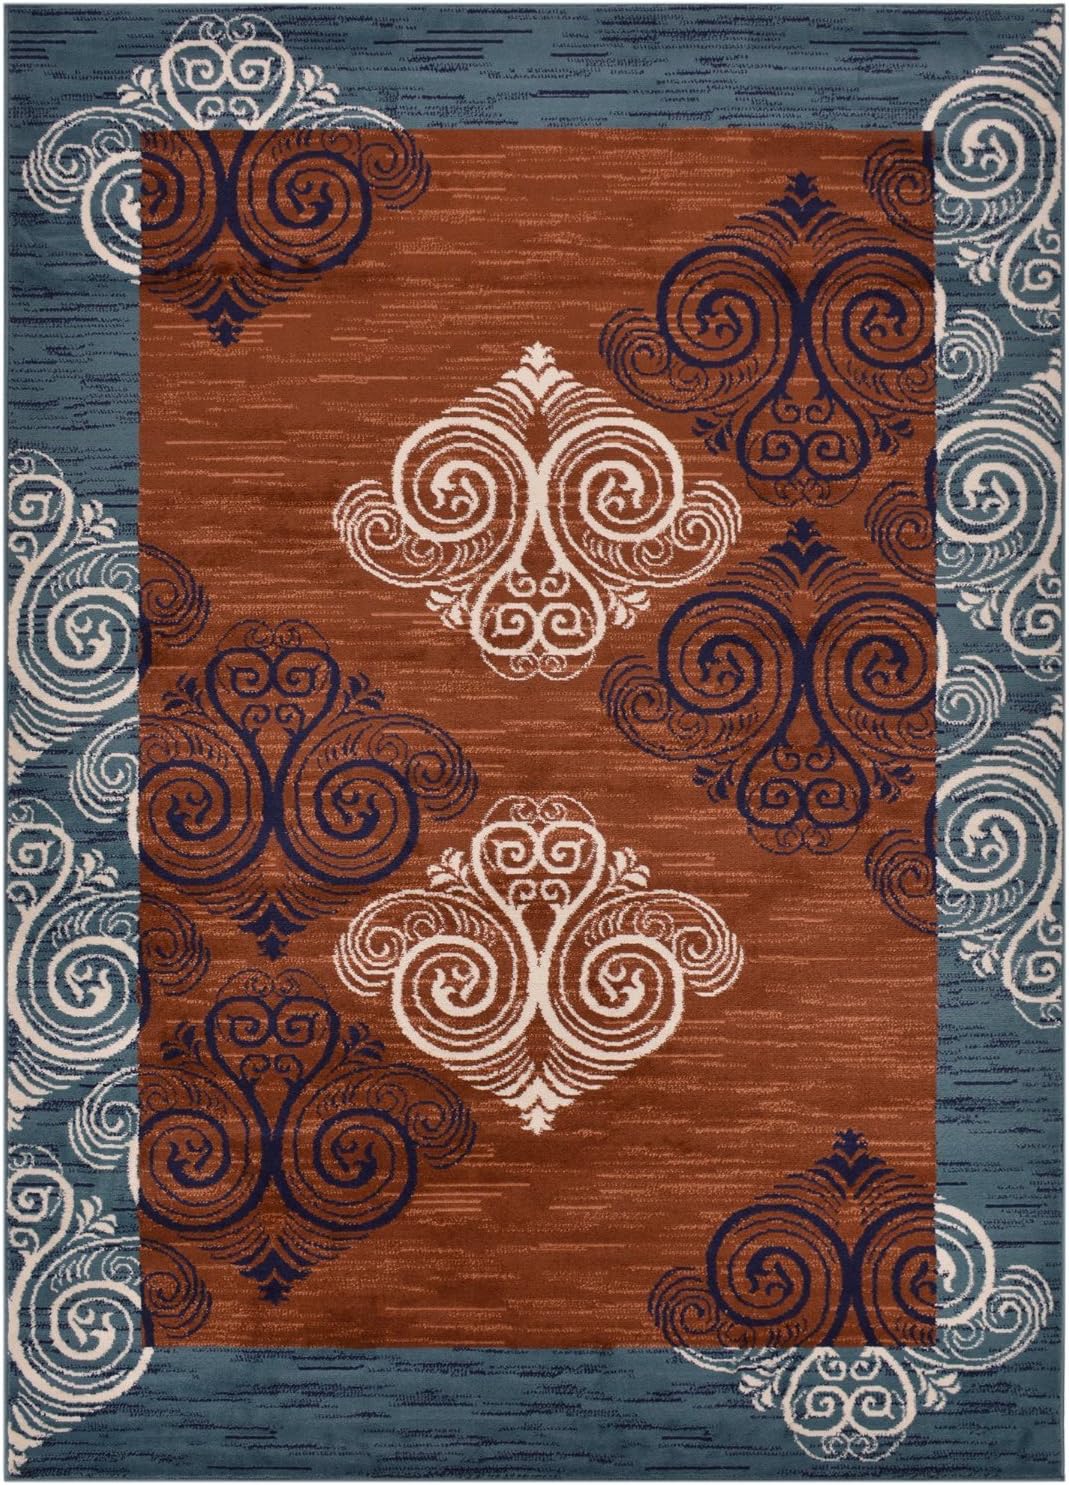 Studio Collection Damask Abstract Design Area Rug Rugs (Damask Teal Blue Brown, 5x7)